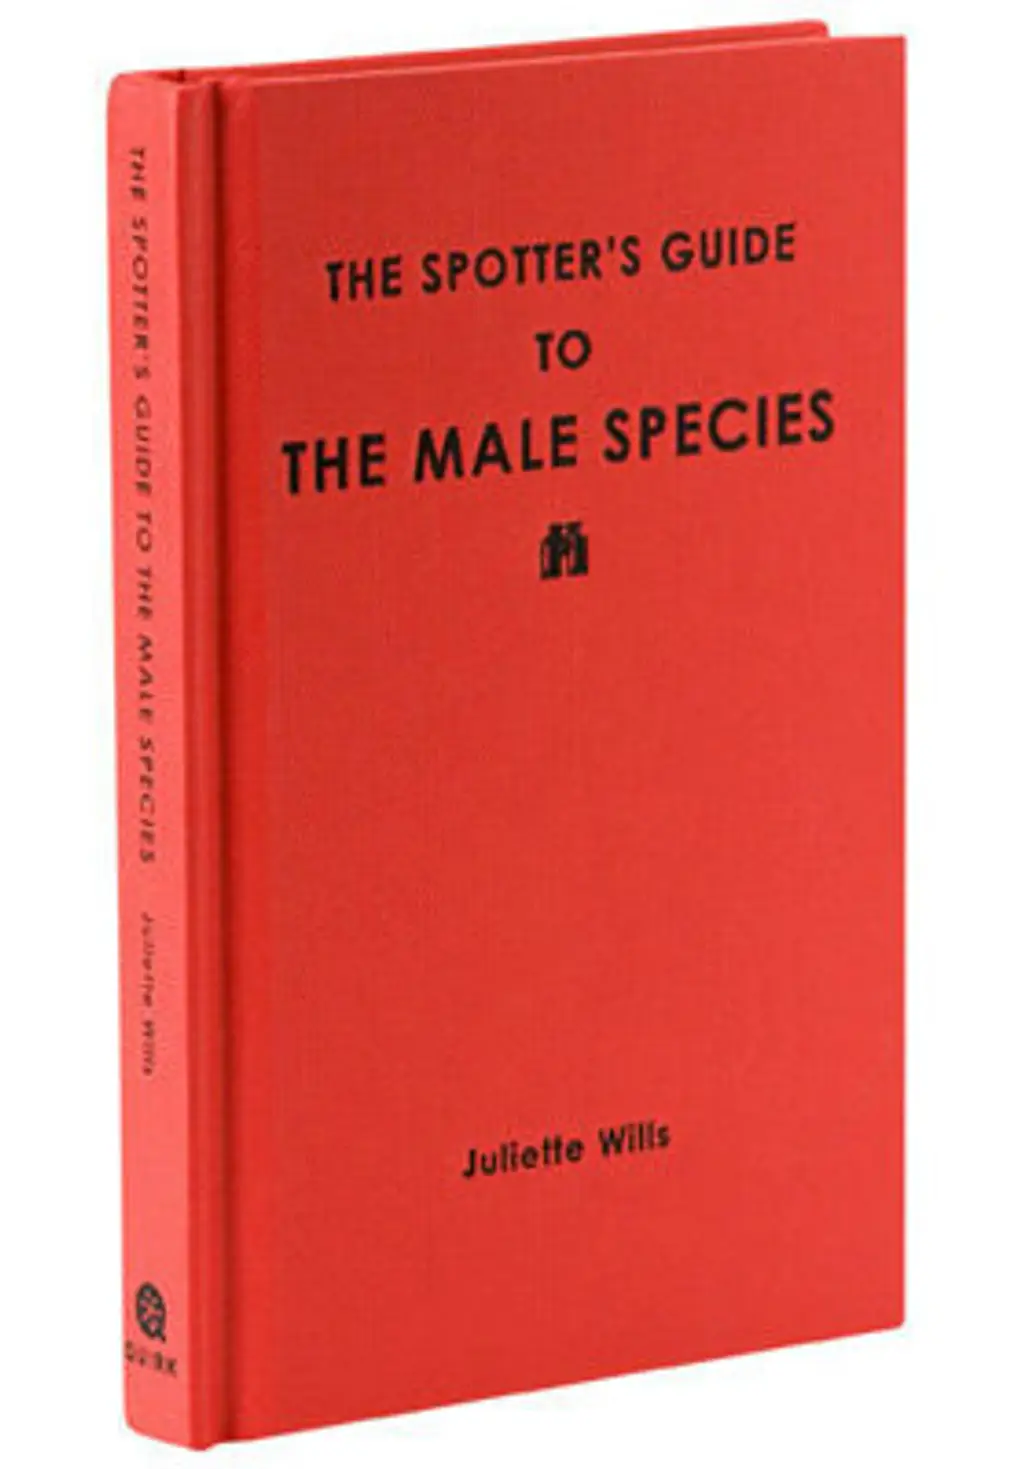 “Spotter's Guide to the Male Species” by Juliette Wills